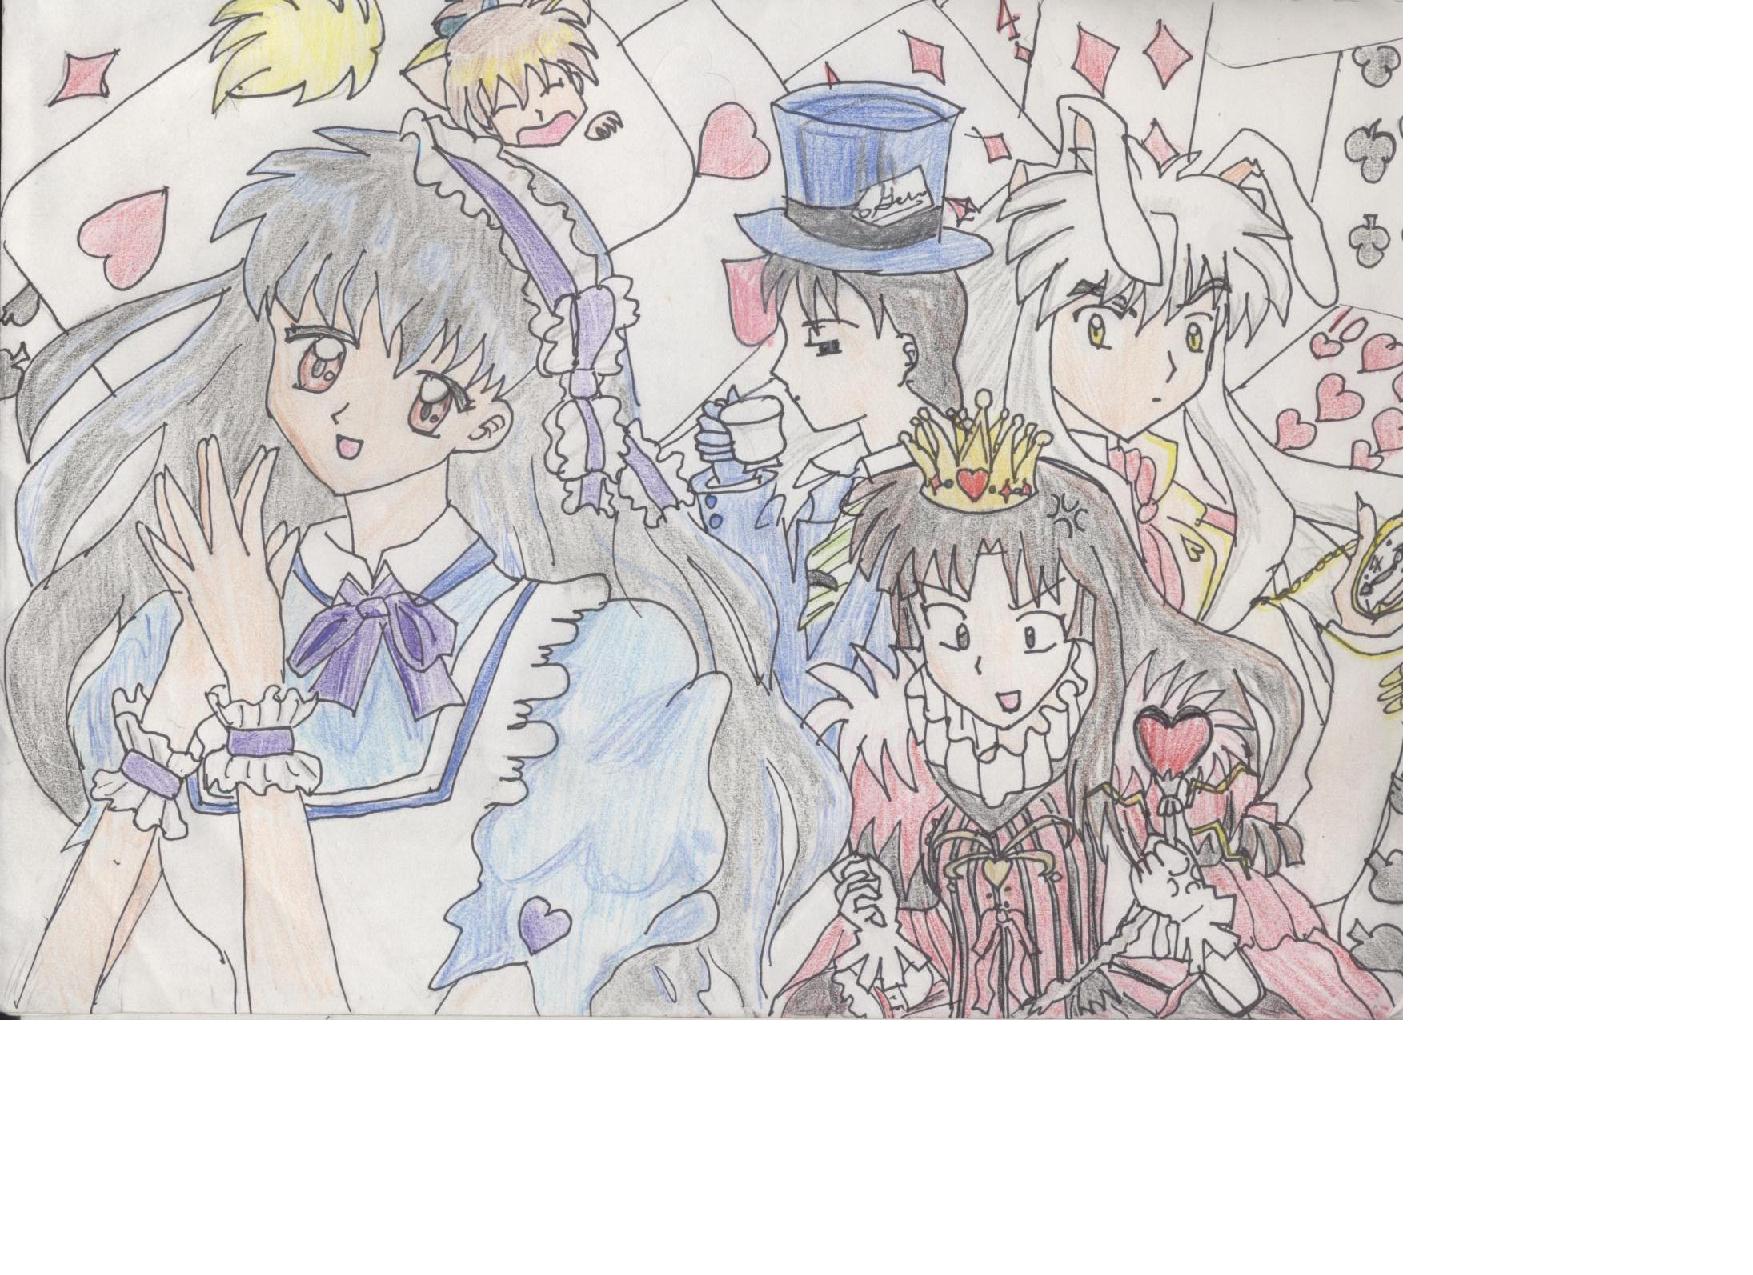 Inuyasha Charaters as Alice and wonder land people by anime132005333